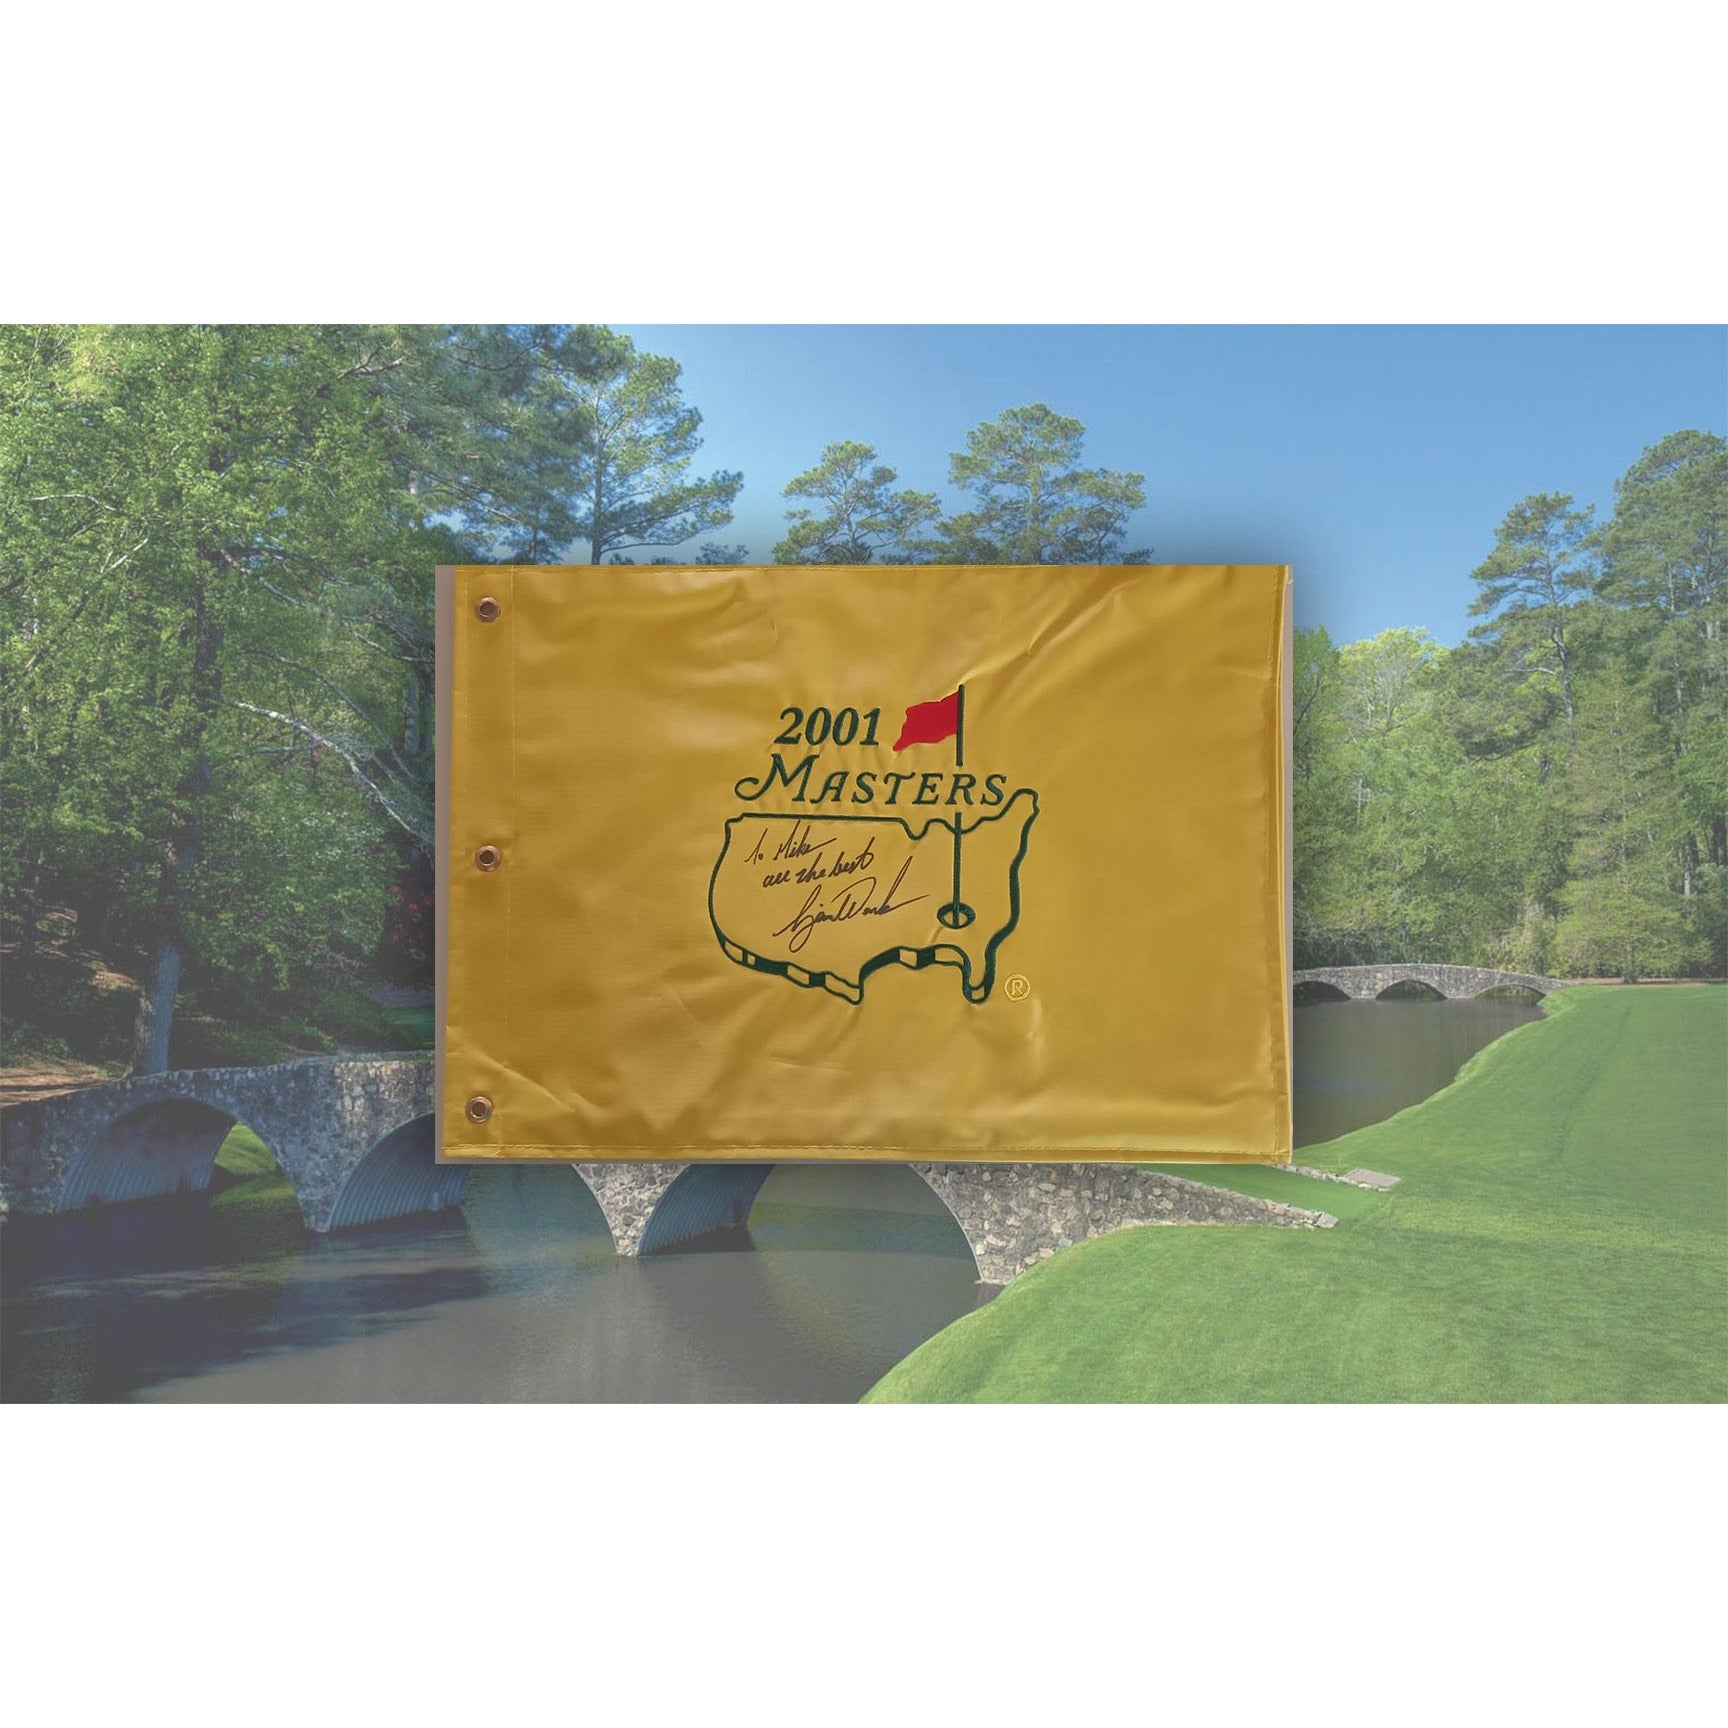 Tiger Woods "To Mike all the best" 2001 Masters Golf pin flag signed with proof